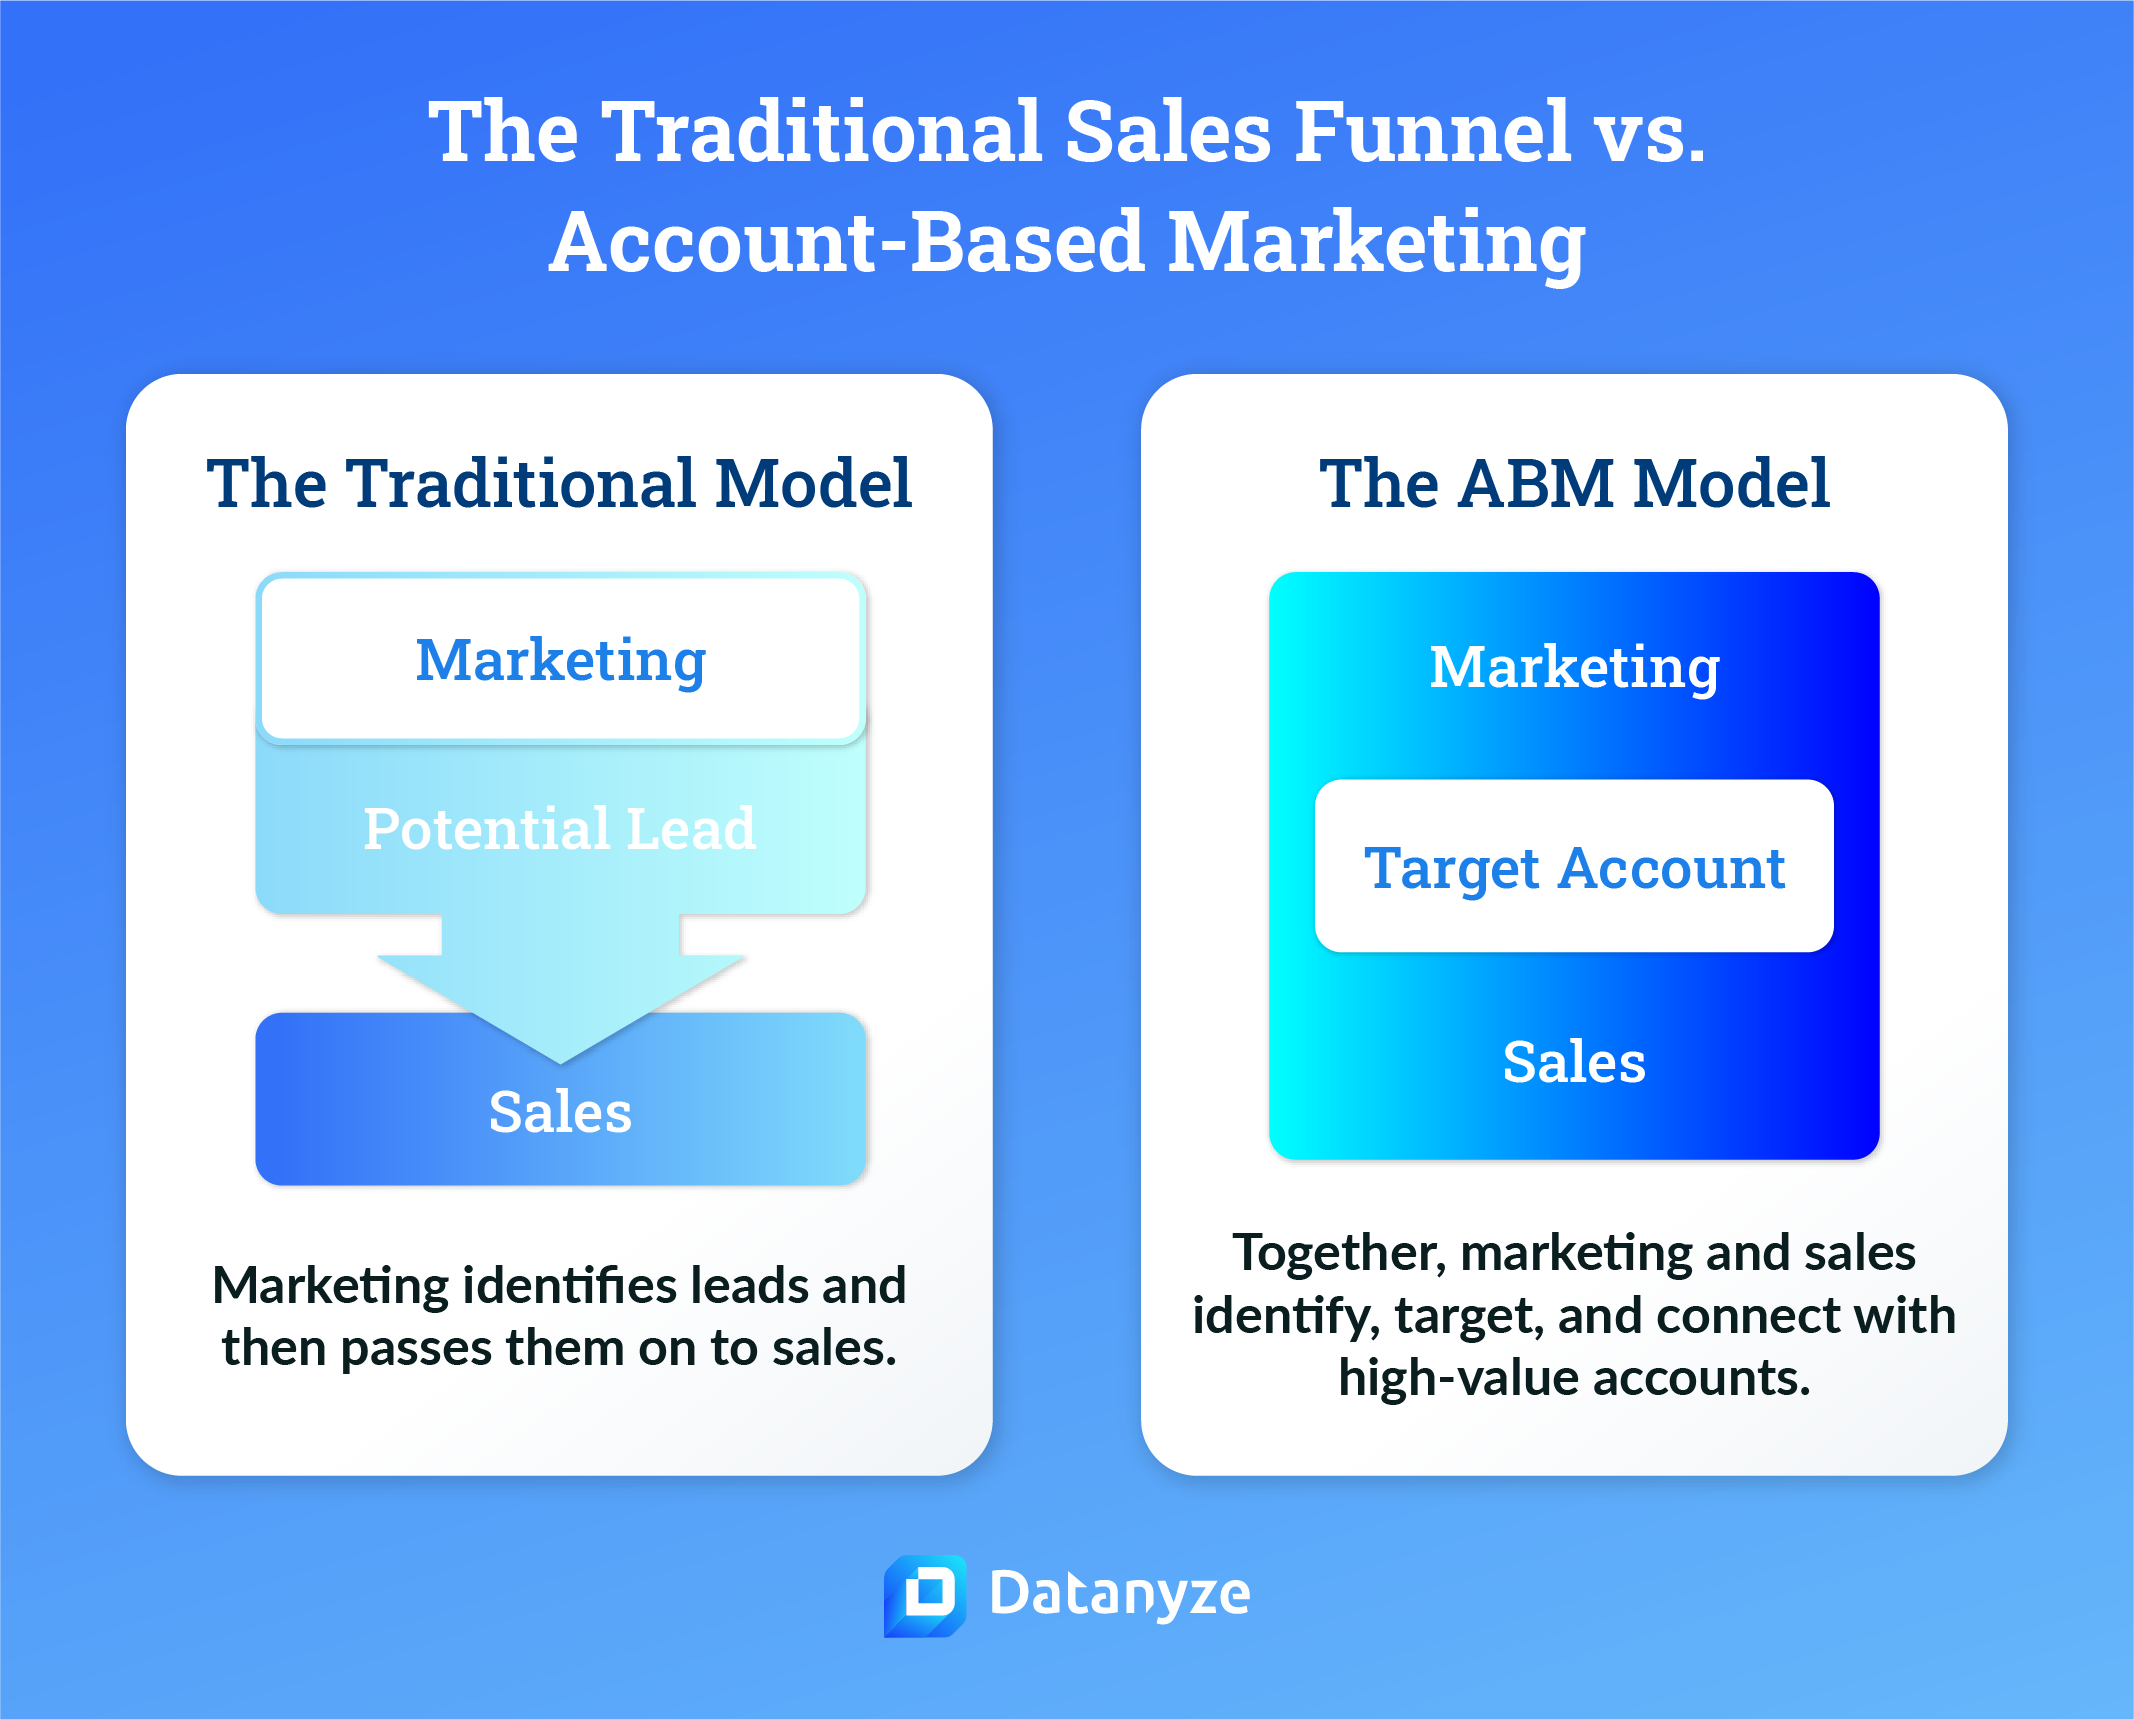 The traditional sales funnel vs. account-based marketing